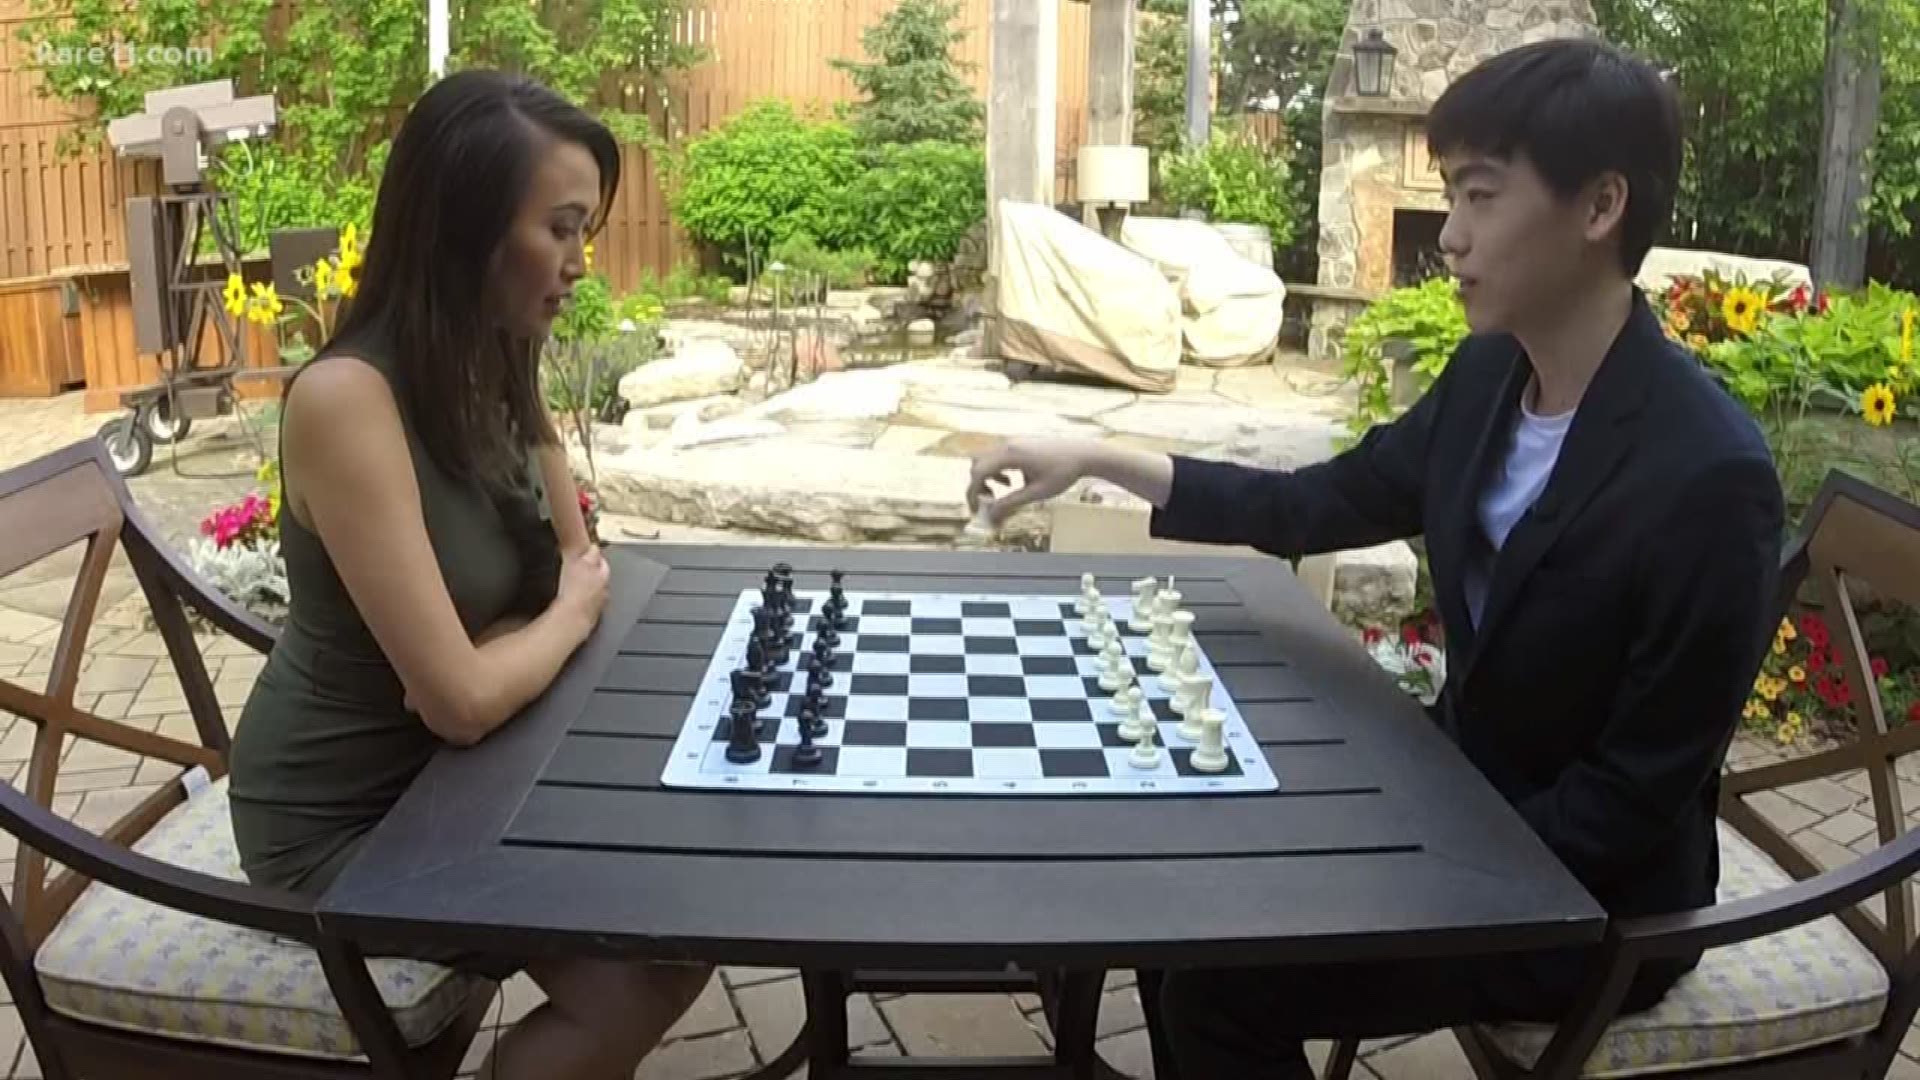 A young chess phenom from Plymouth is so good he is taking part in the U.S. Juniors Championship. Before going, however, he took KARE 11's Gia Yang to school, so to speak.